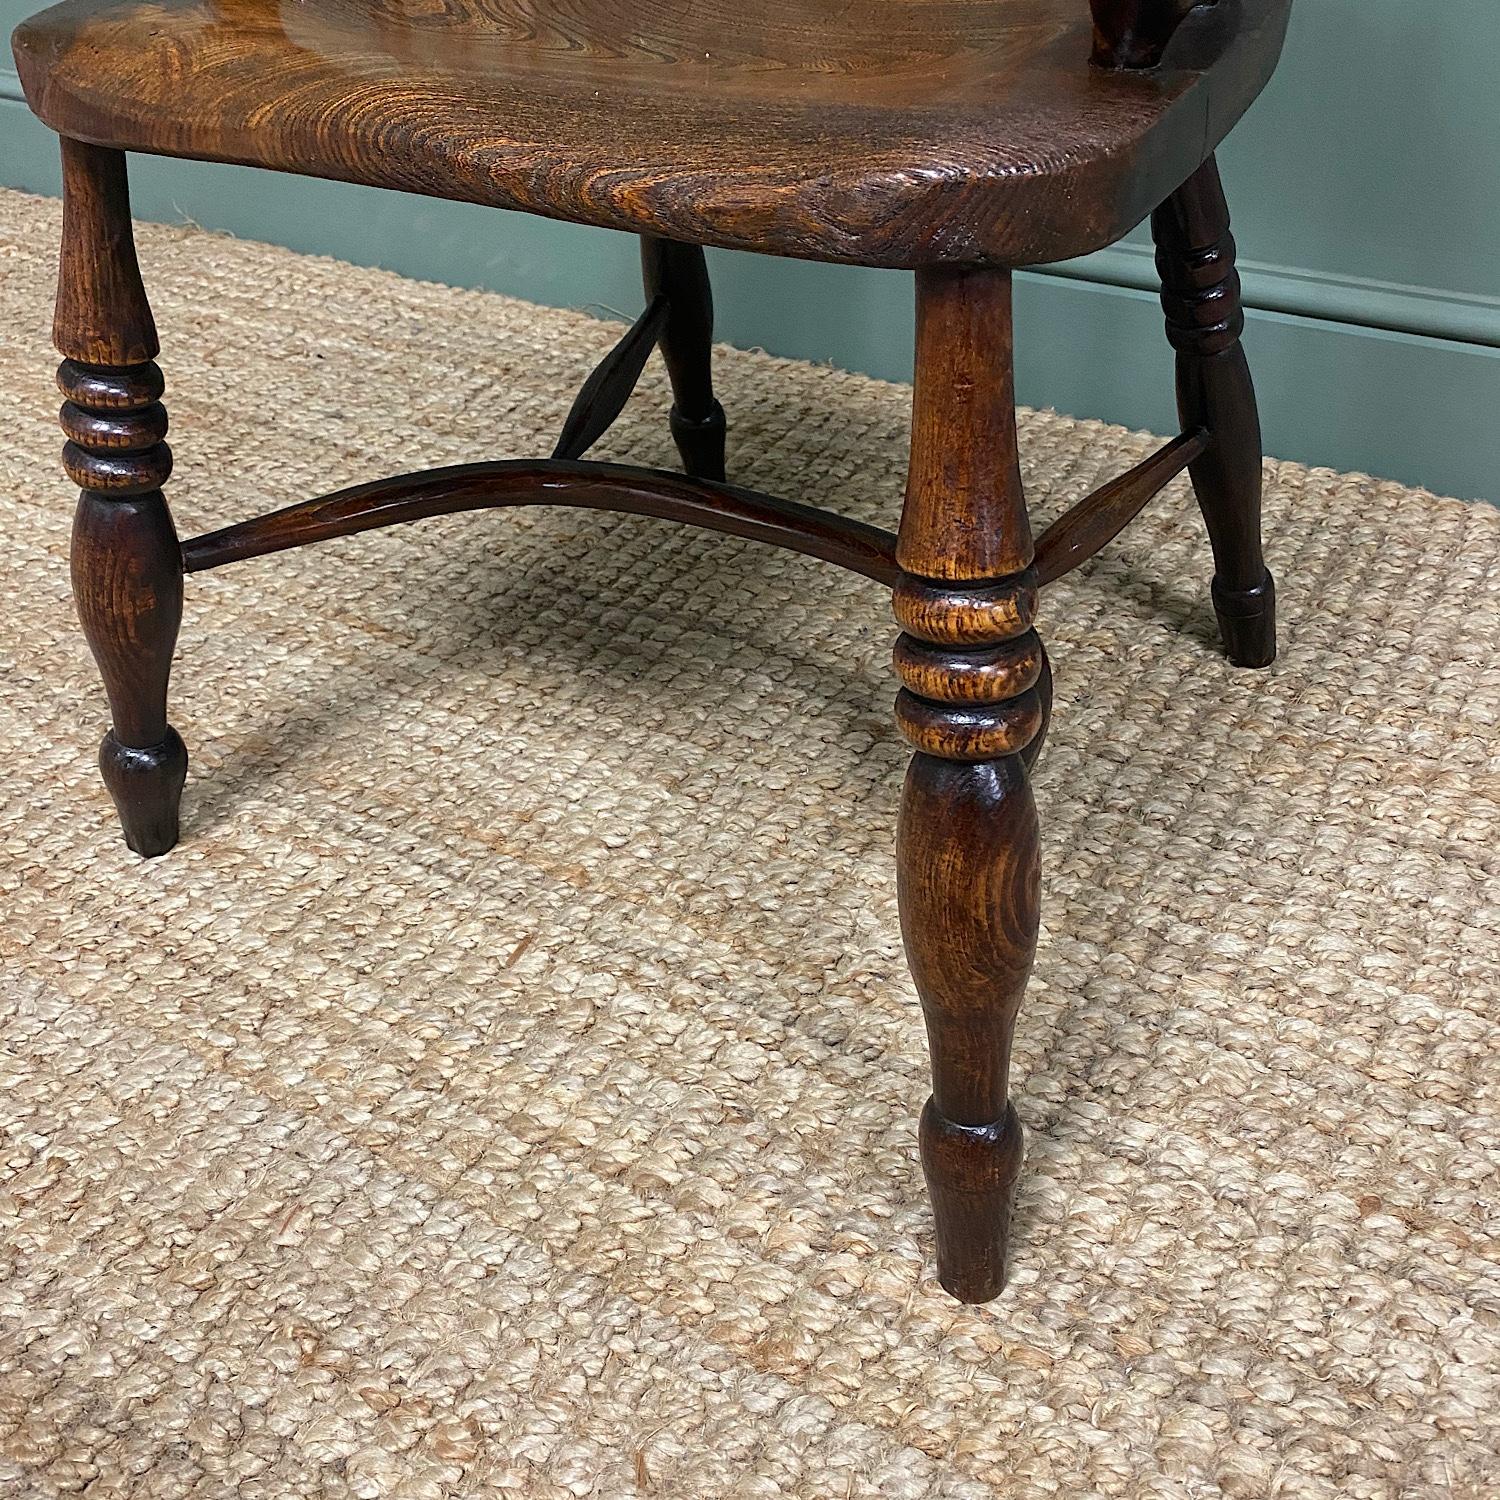 Victorian country oak antique windsor chair

This mid-19th century Victorian Country House Oak & Elm Antique Windsor Chair ca. 1860 has a beautiful curved back with pierced back splat and beautiful turned upright supports. The seat is beautifully